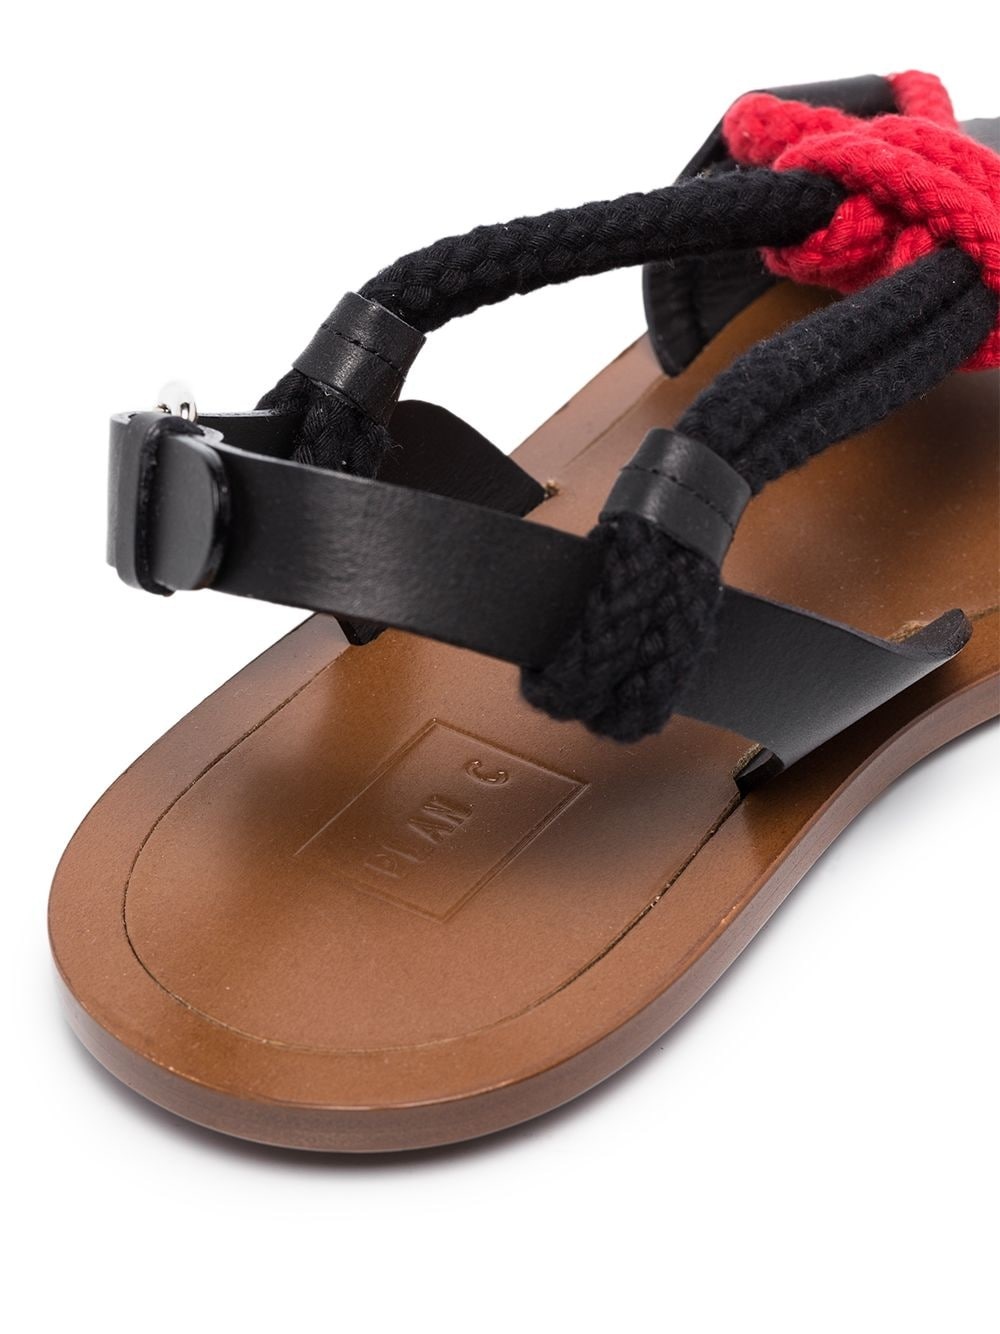 rope strap sandals - 2